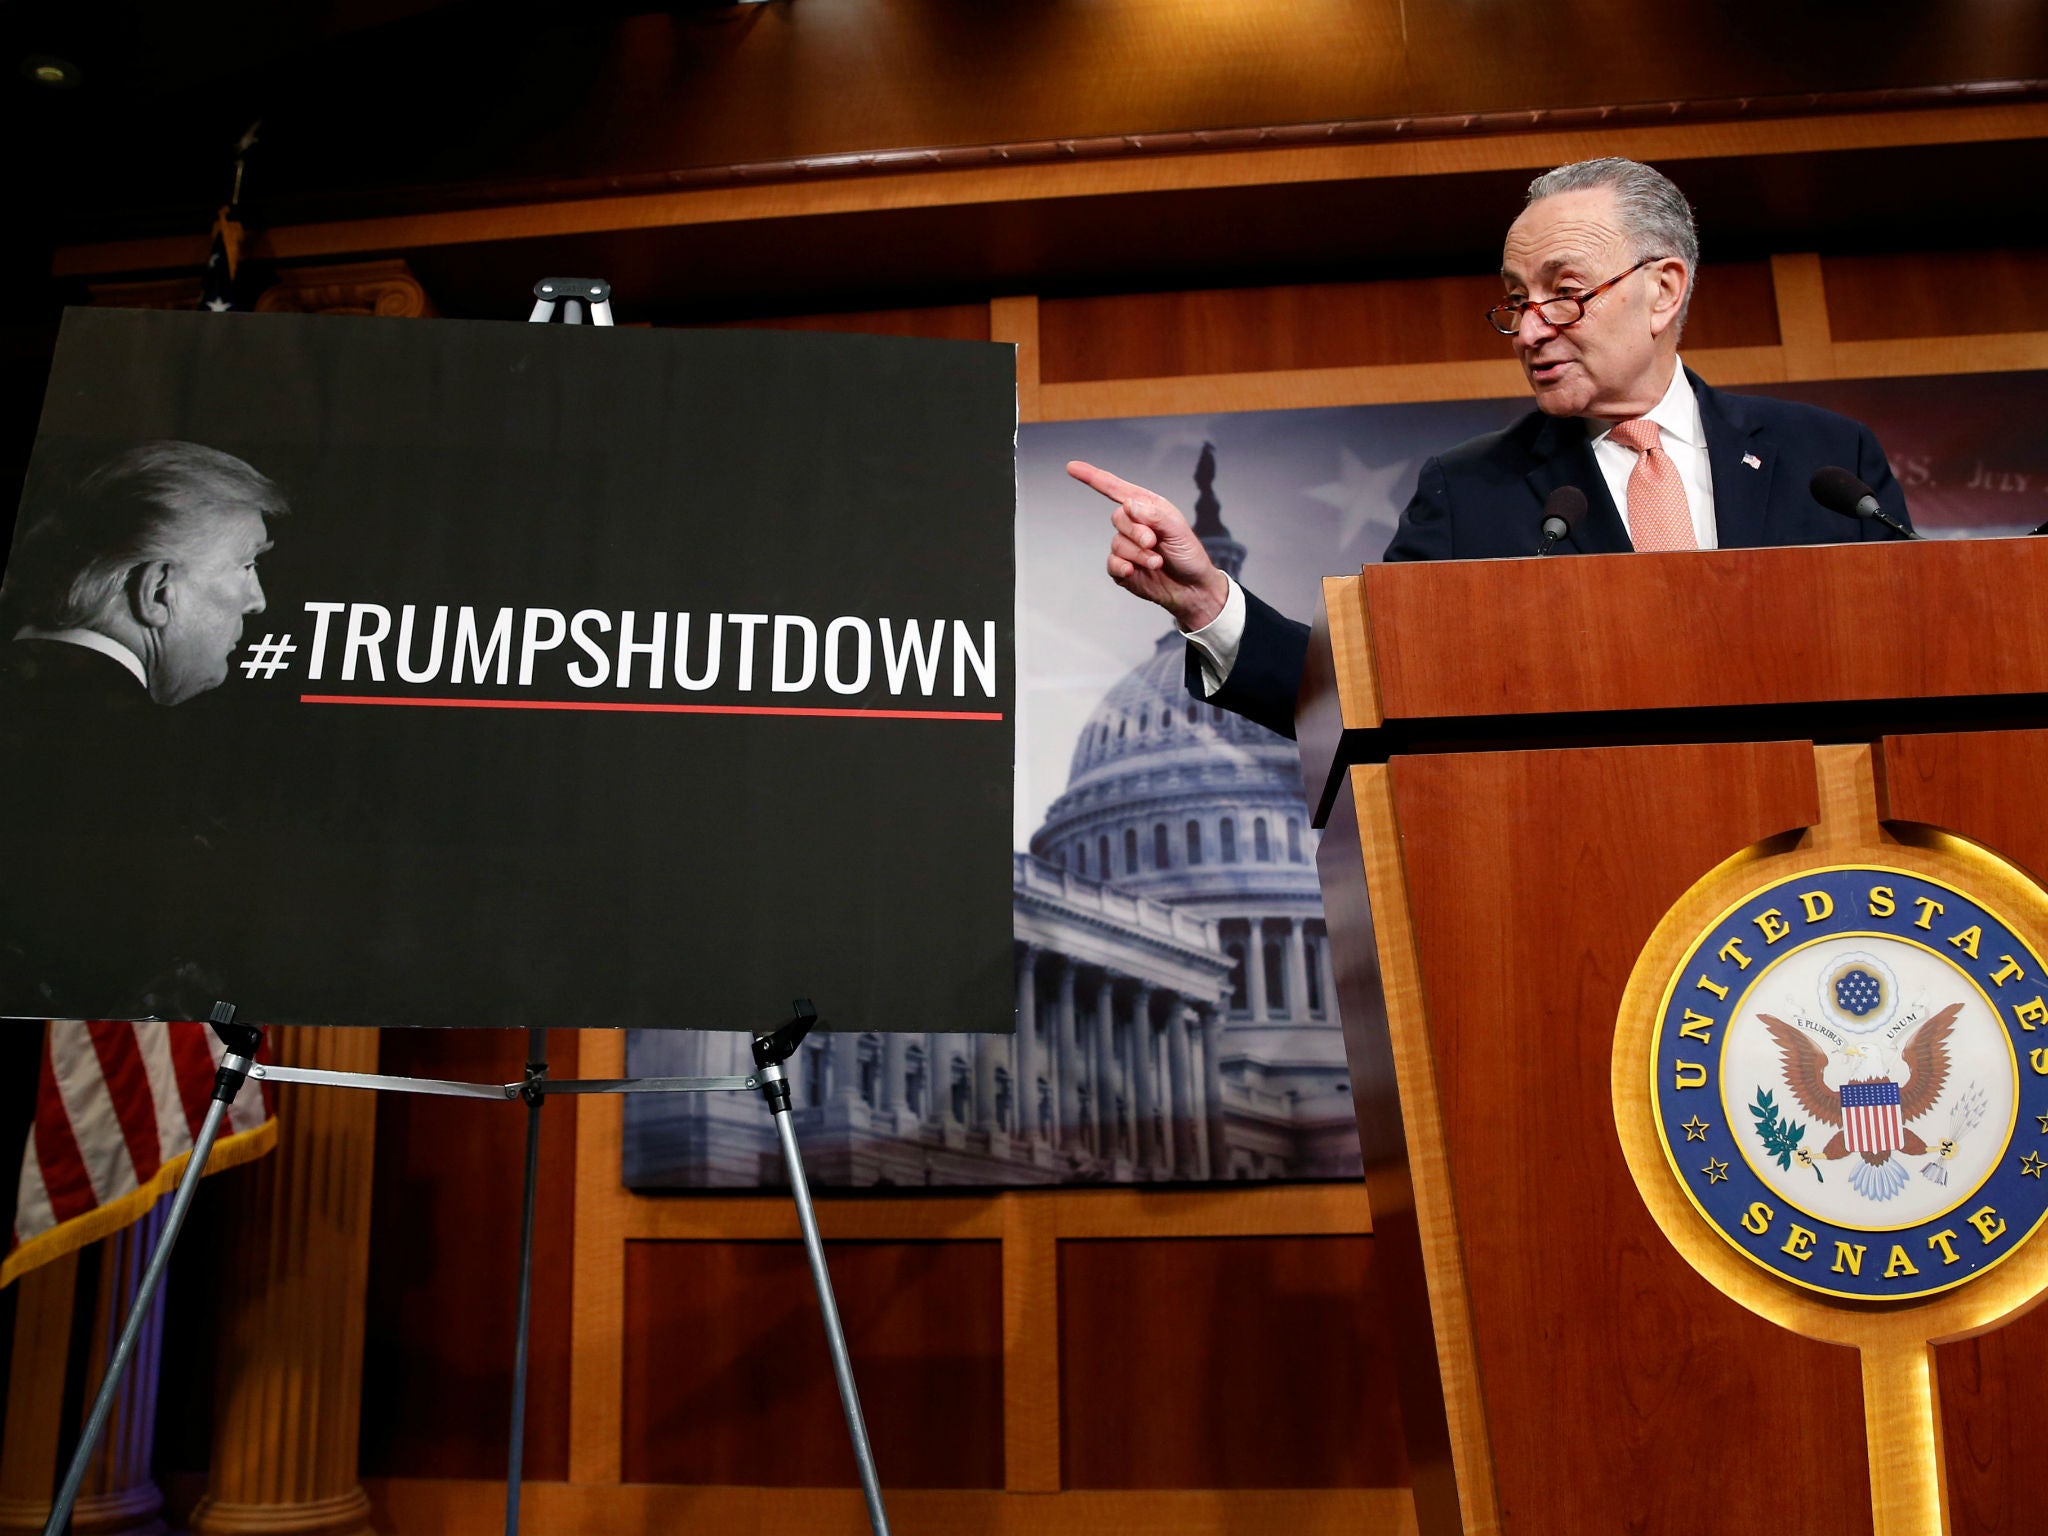 Top Senate Democrat Chuck Schumer seeks to place the blame for a government shutdown on Donald Trump during a news conference